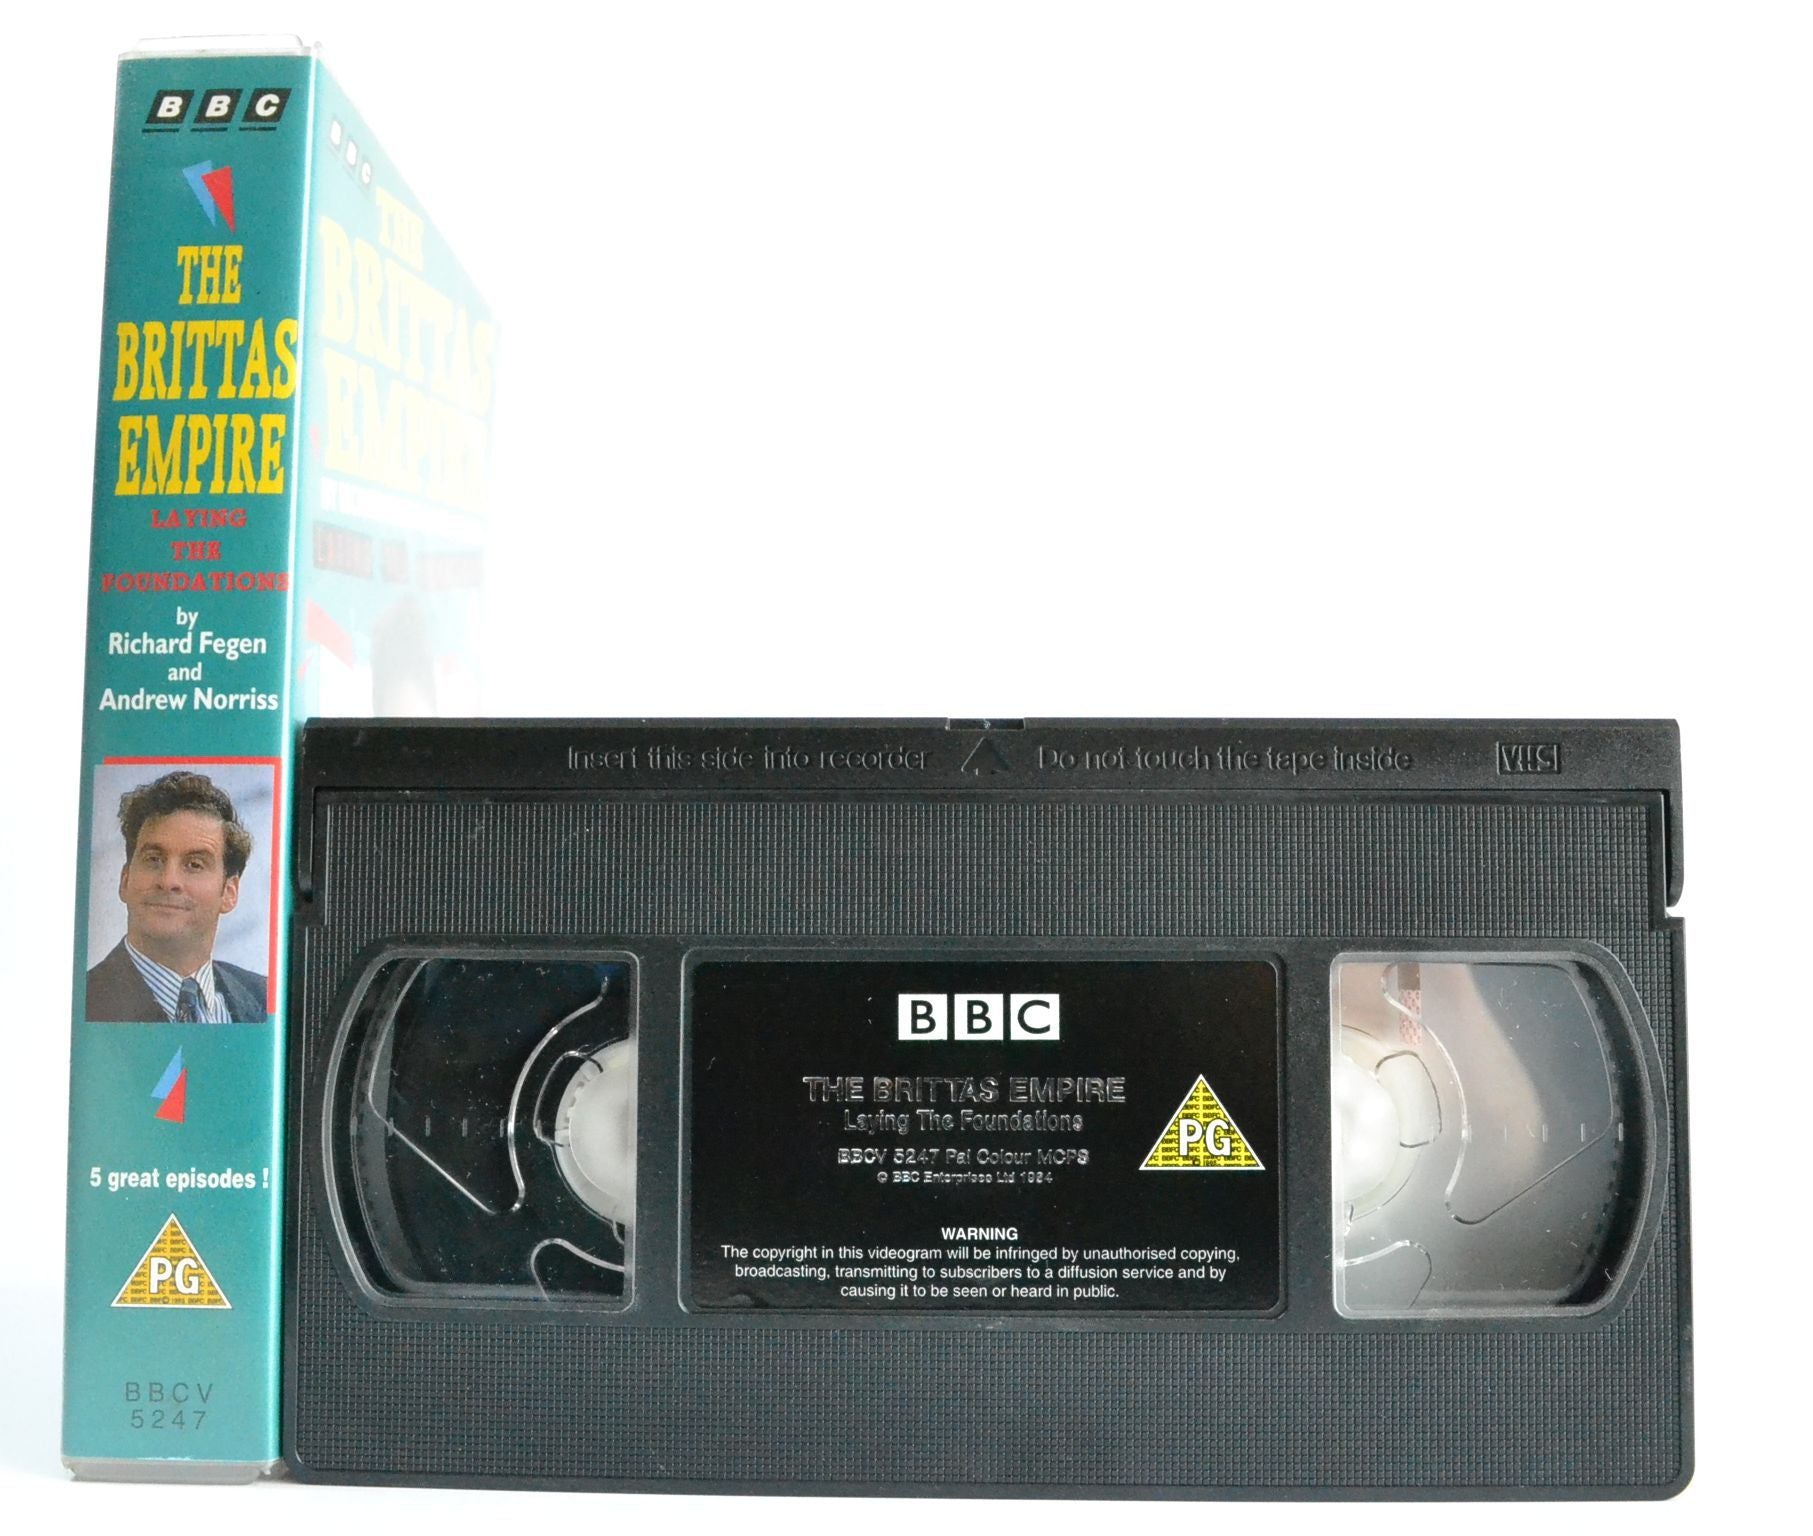 The Brittas Empire (BBC): Laying the Foundations [145 Mins] Fegen Comedy - VHS-